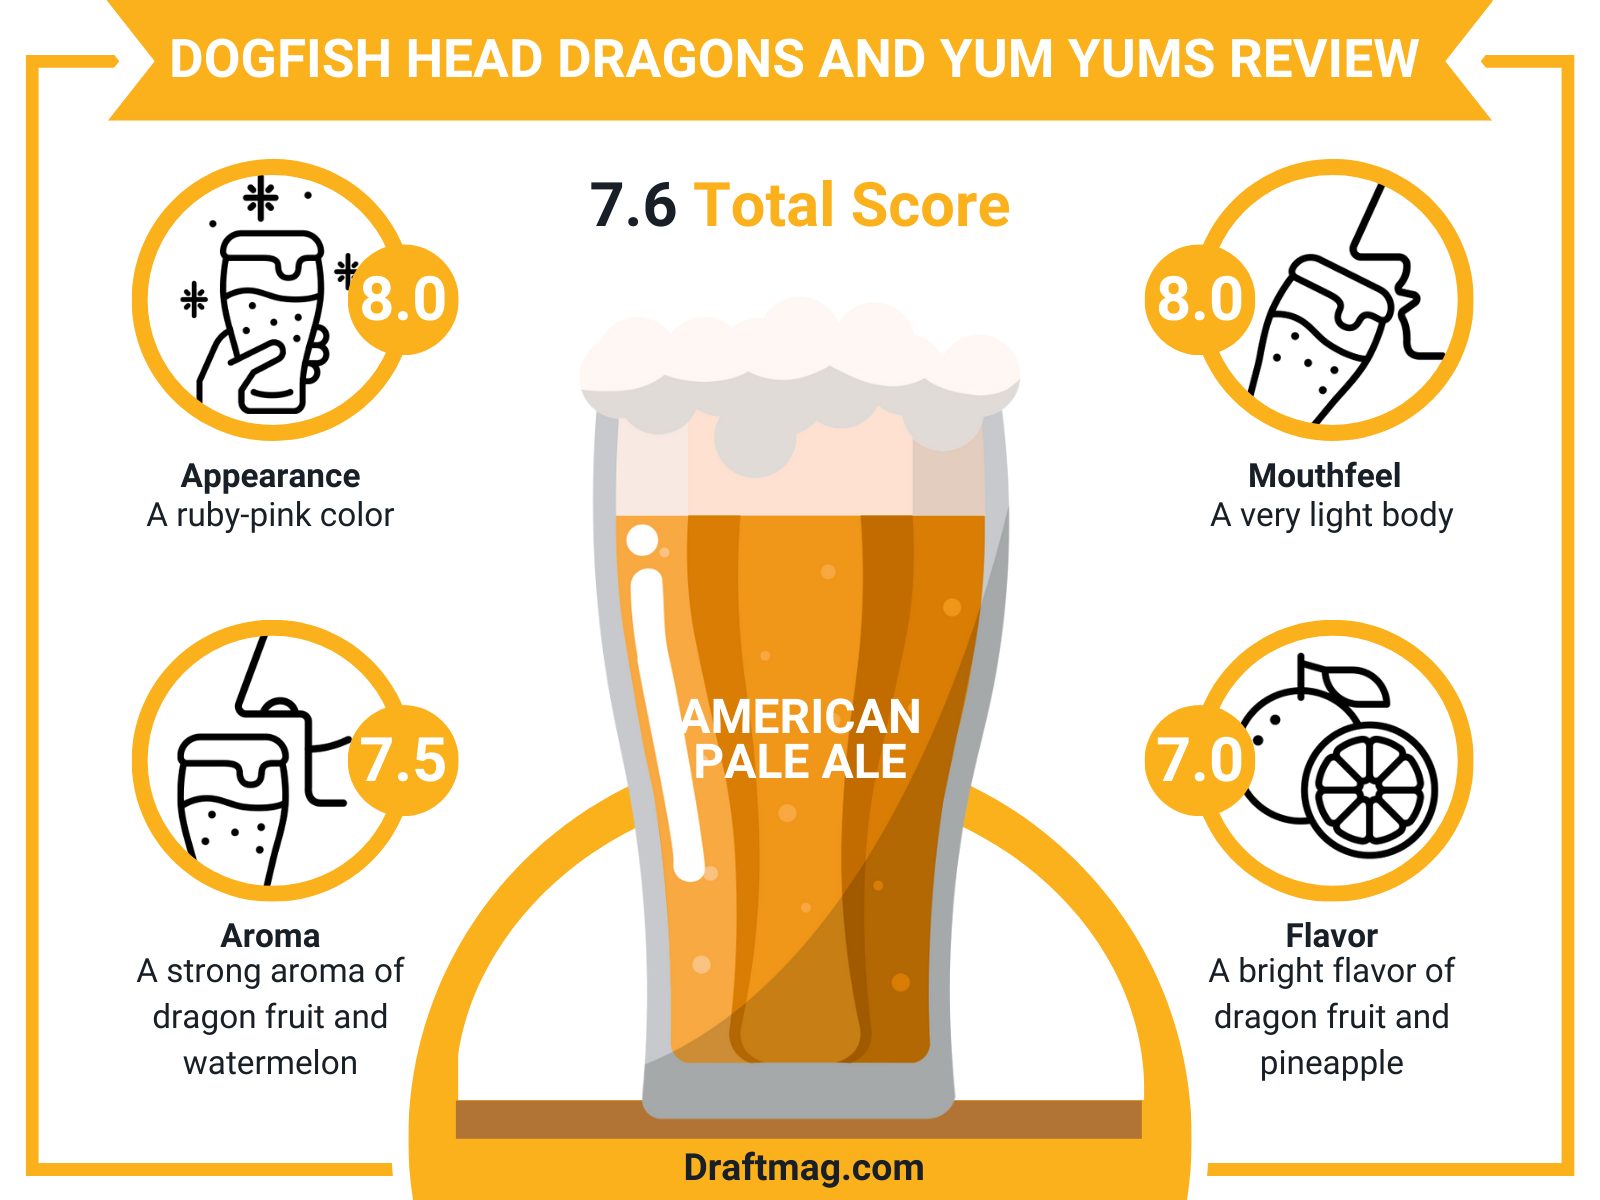 Dogfish head dragons review infographic